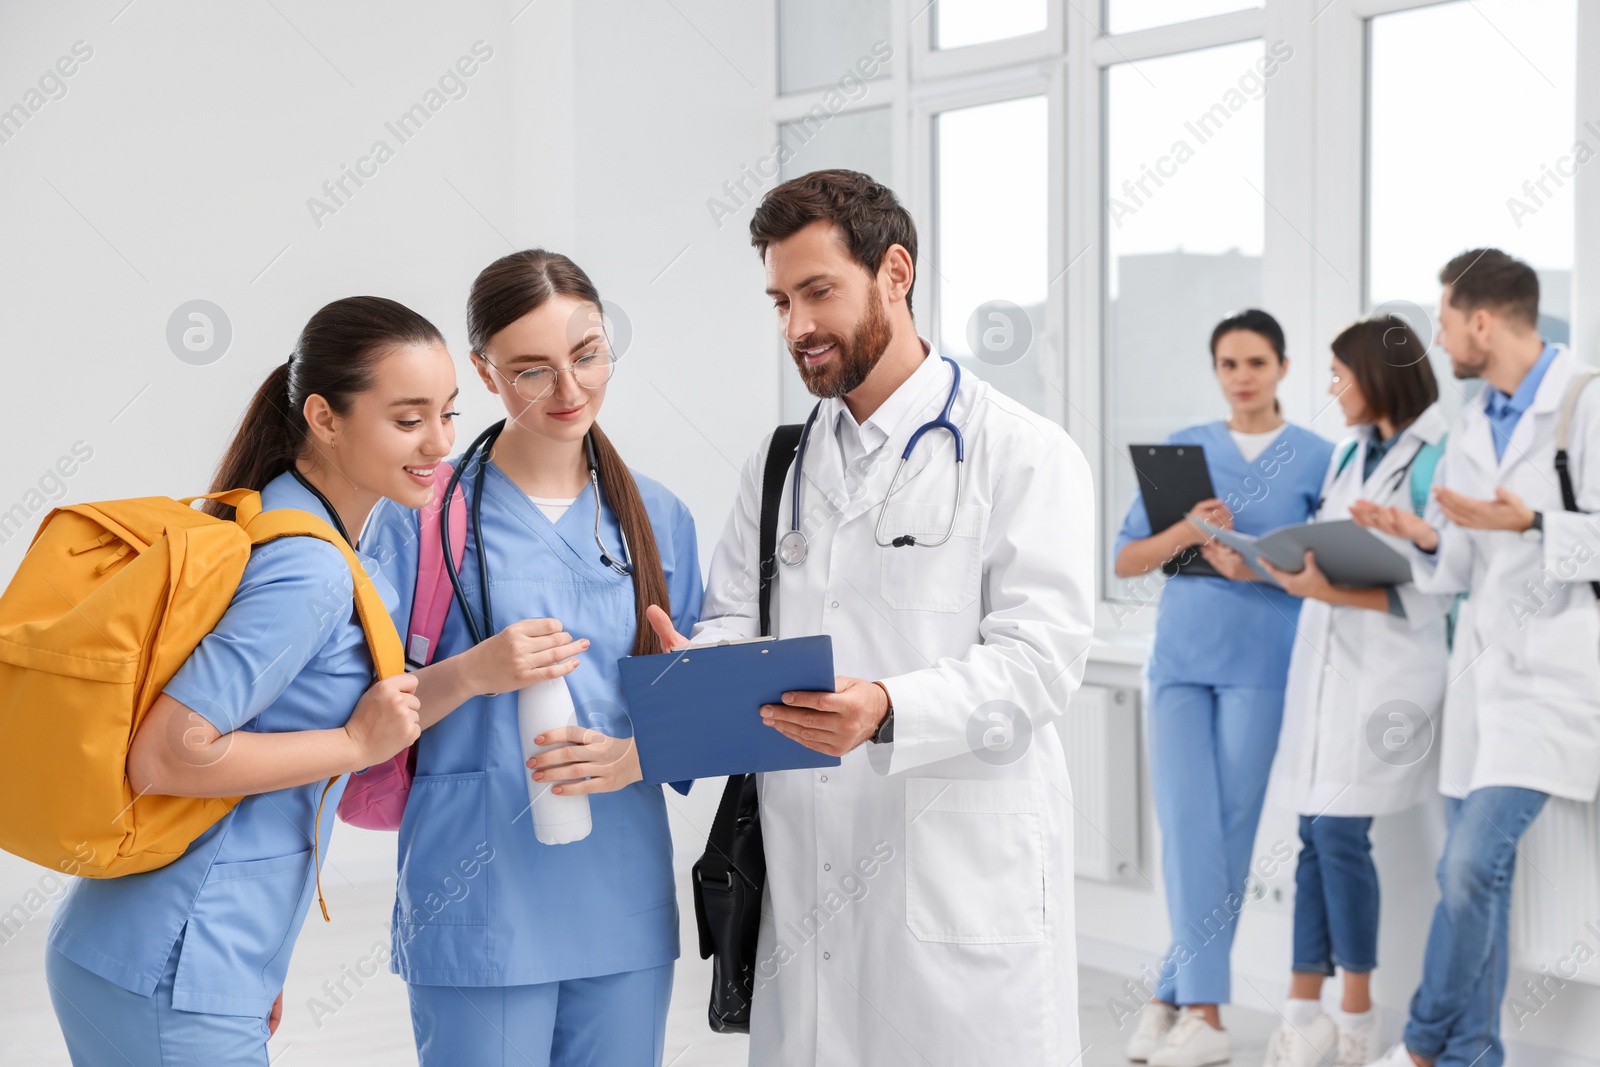 Photo of Team of medical students in college hallway, space for text